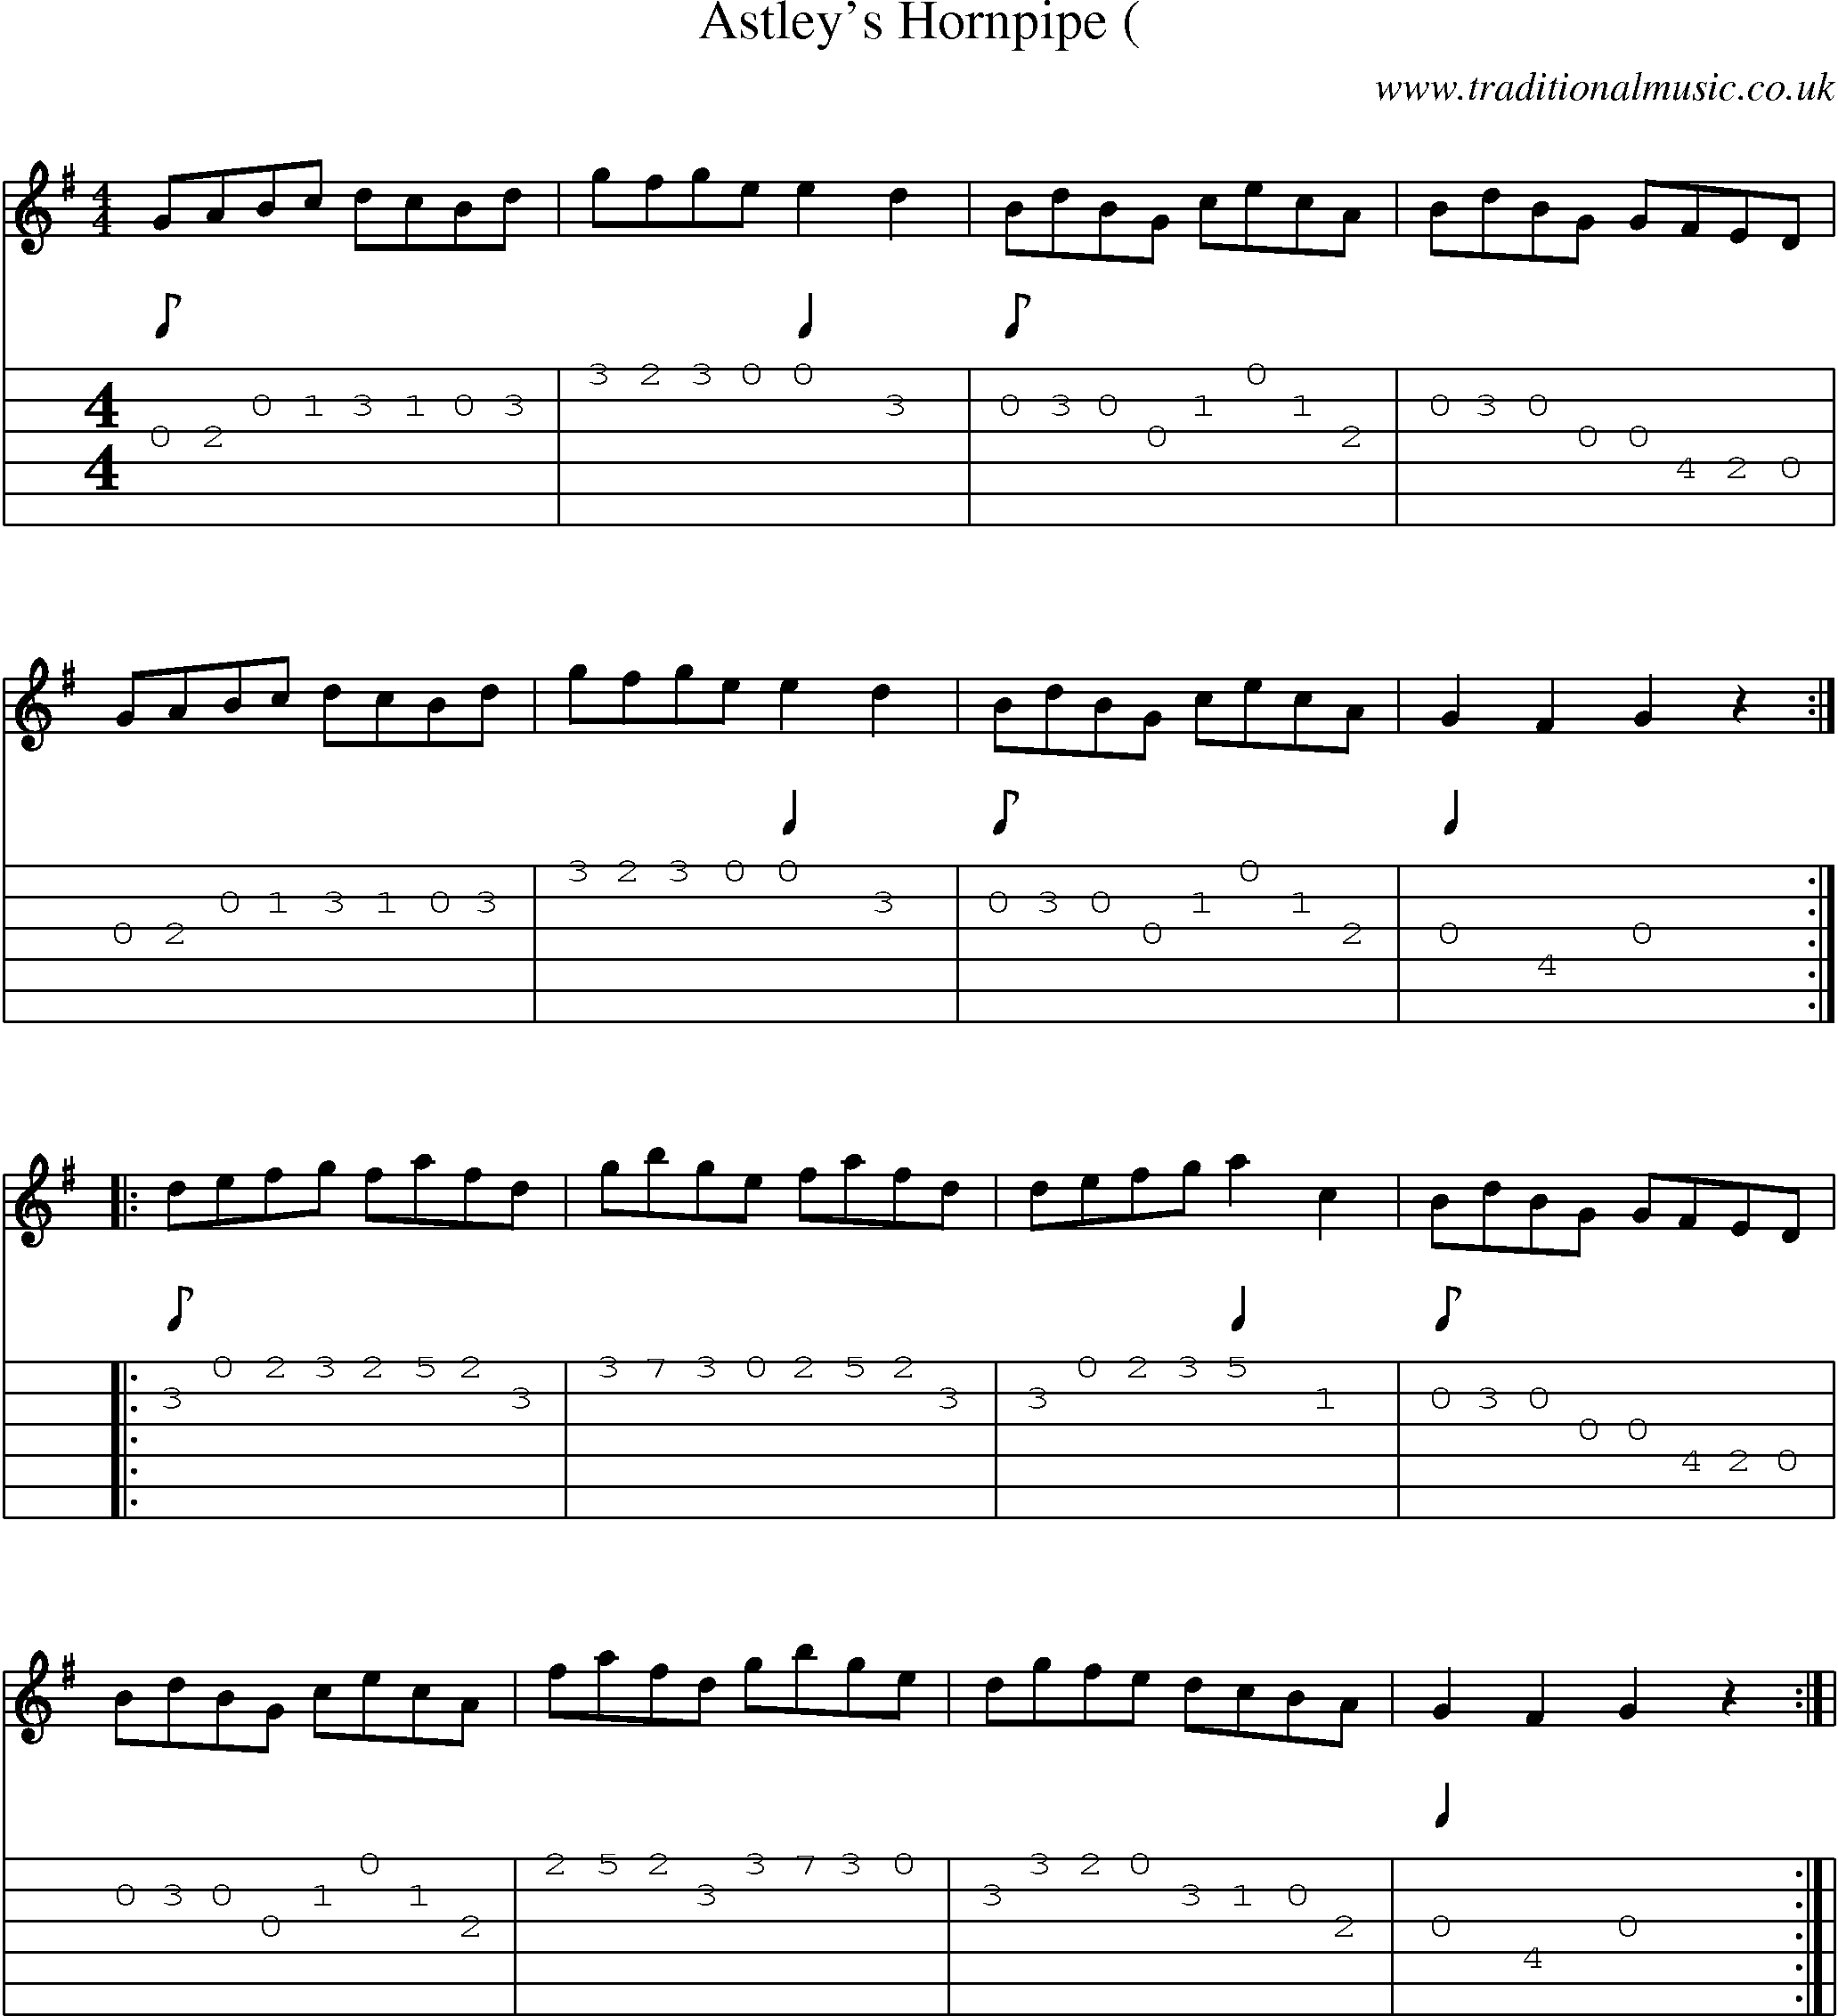 Music Score and Guitar Tabs for Astleys Hornpipe